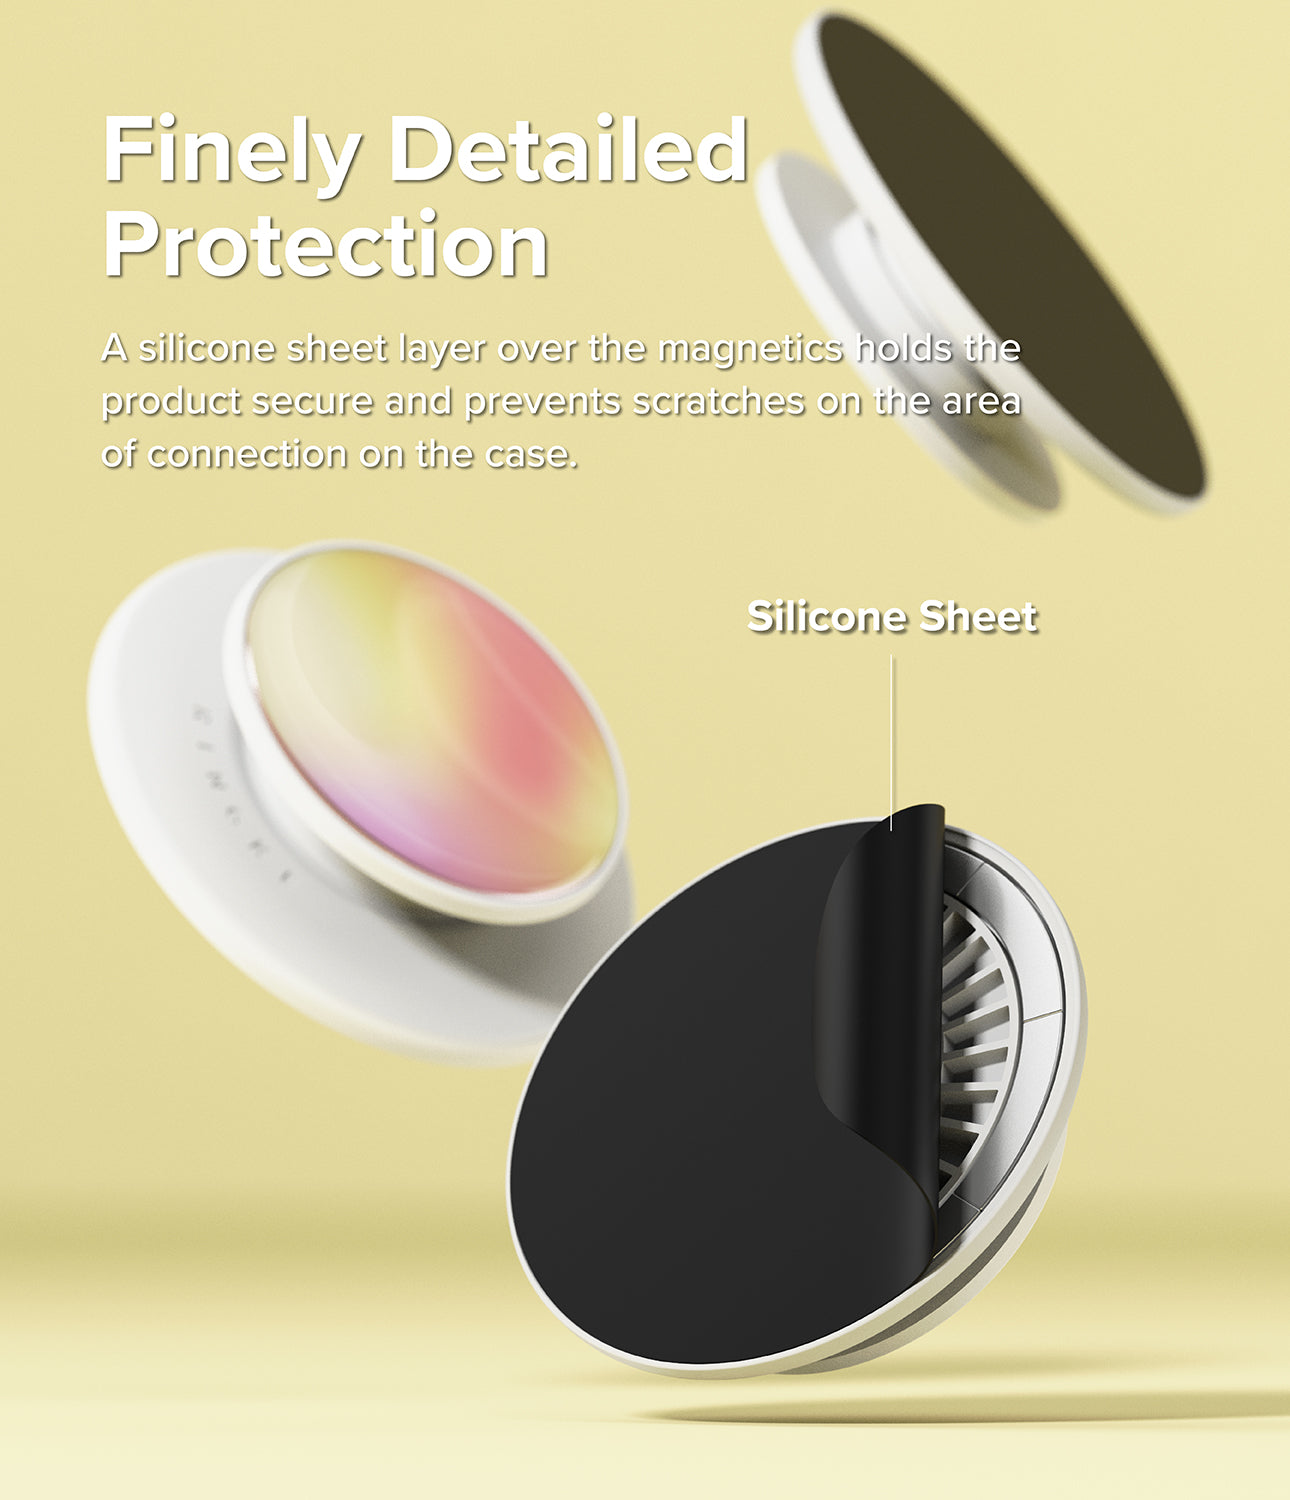 Ringke Glossy Tok Magnetic - Finely Detailed Protection. A silicone sheet layer over the magnetics holds the product secure and prevents scratches on the area of connection on the case.